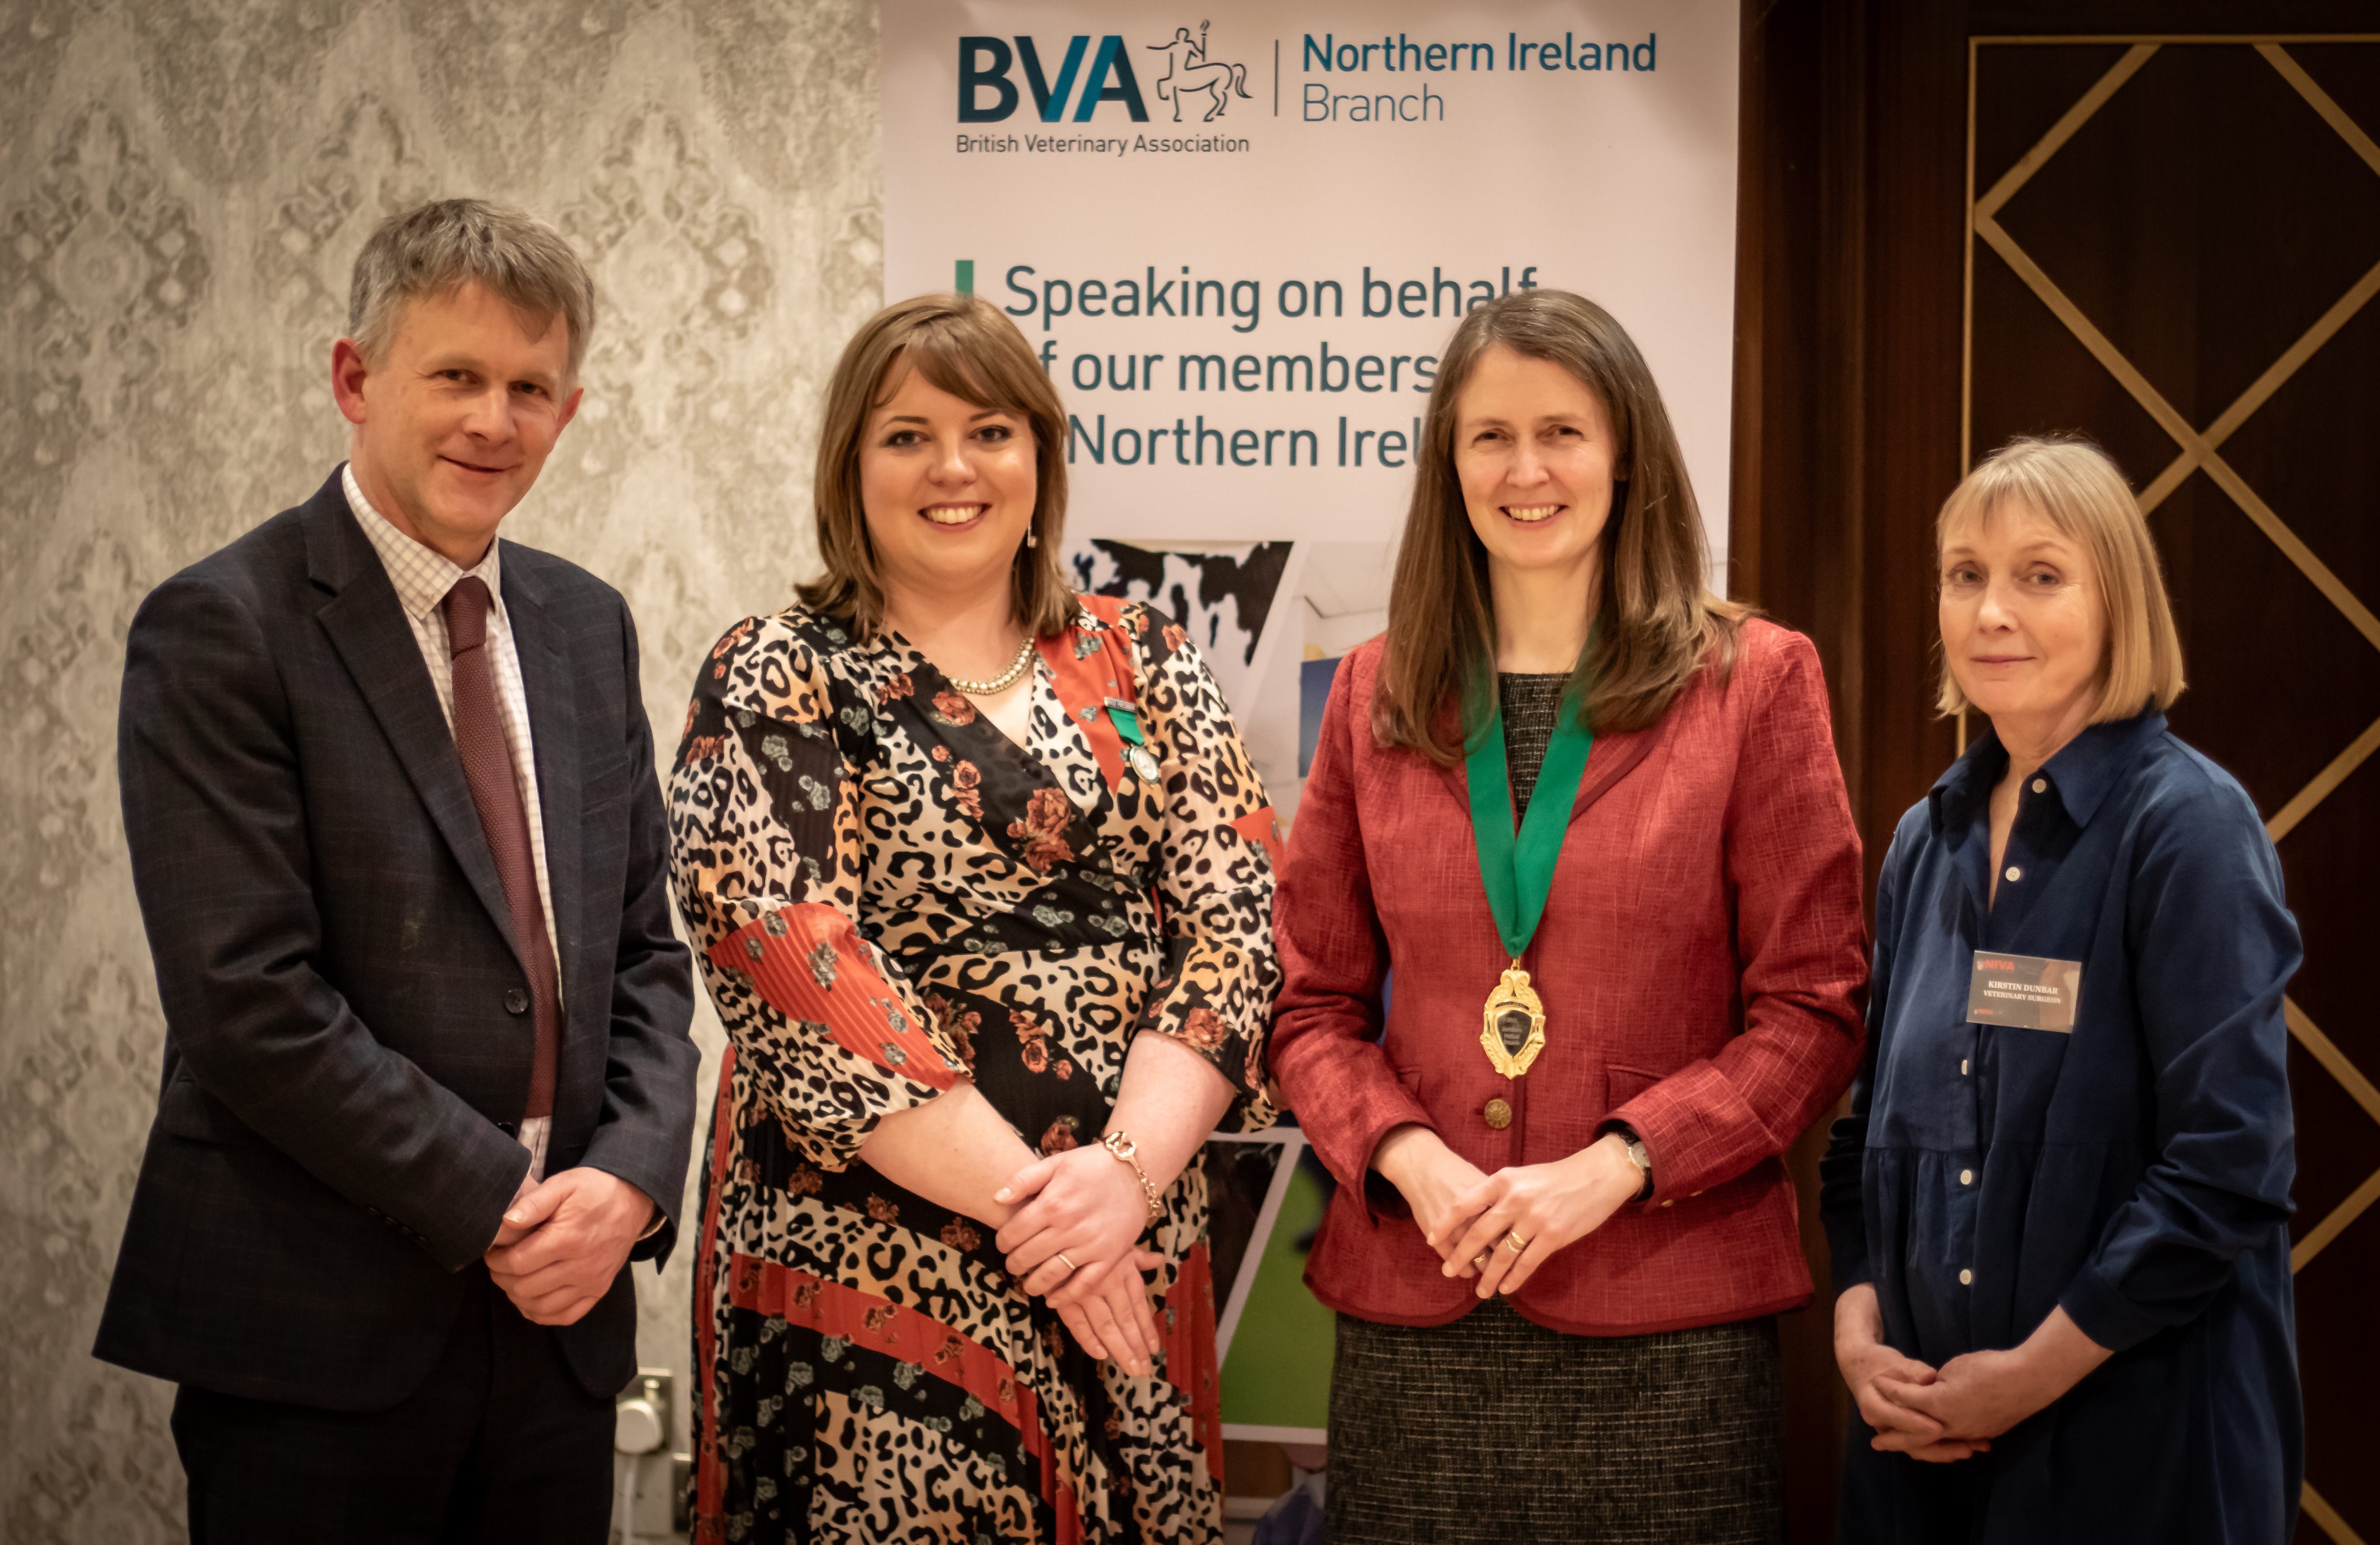 New President elected for BVA Northern Ireland Branch and North of Ireland Veterinary Association Listing Image